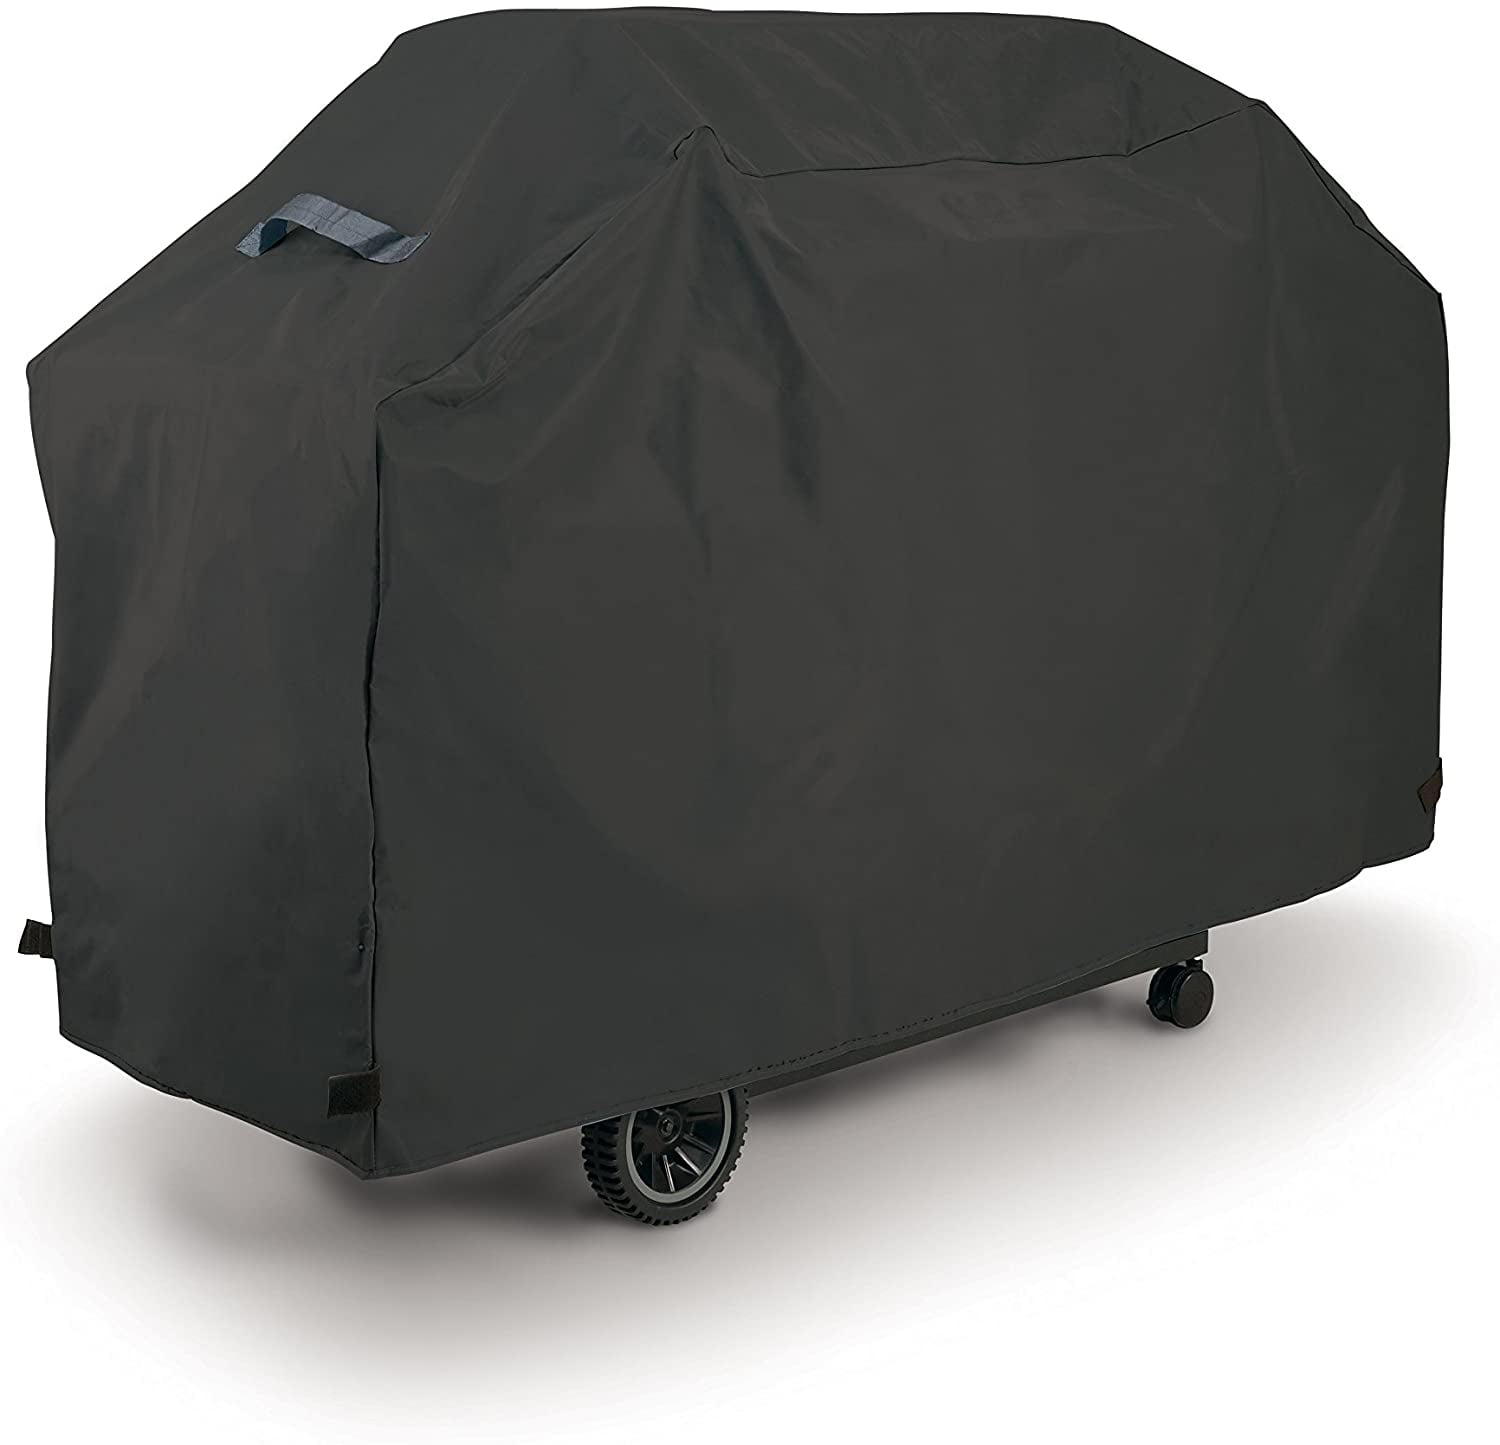 Char-Broil 68" Heavy-Duty Grill Cover for sale online 